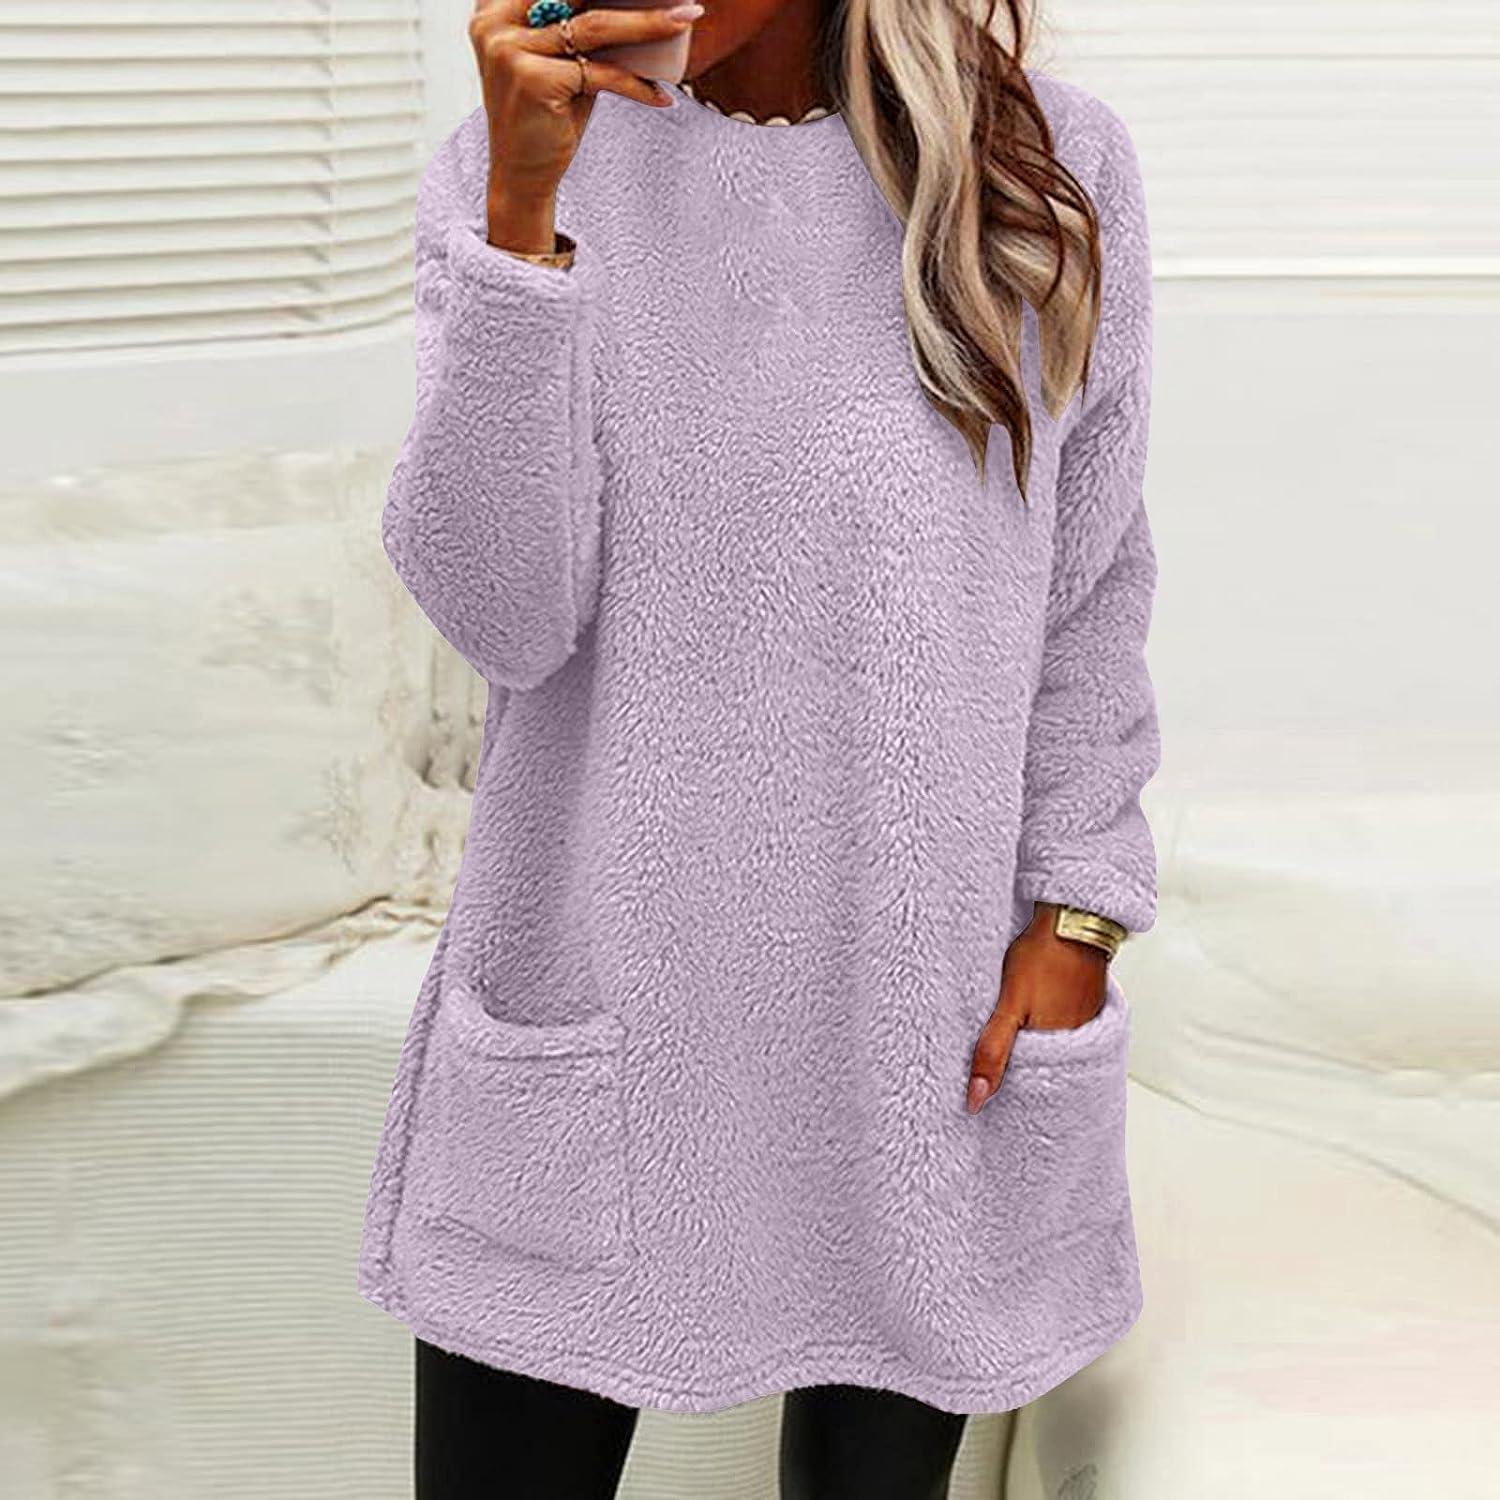 ZCVBOCZ Fuzzy Tops for Women Casual Solid Color Round Neck Long Sleeve  Blouse Thick Thermal Soft Sweatshirts with Pocket Large 01purple